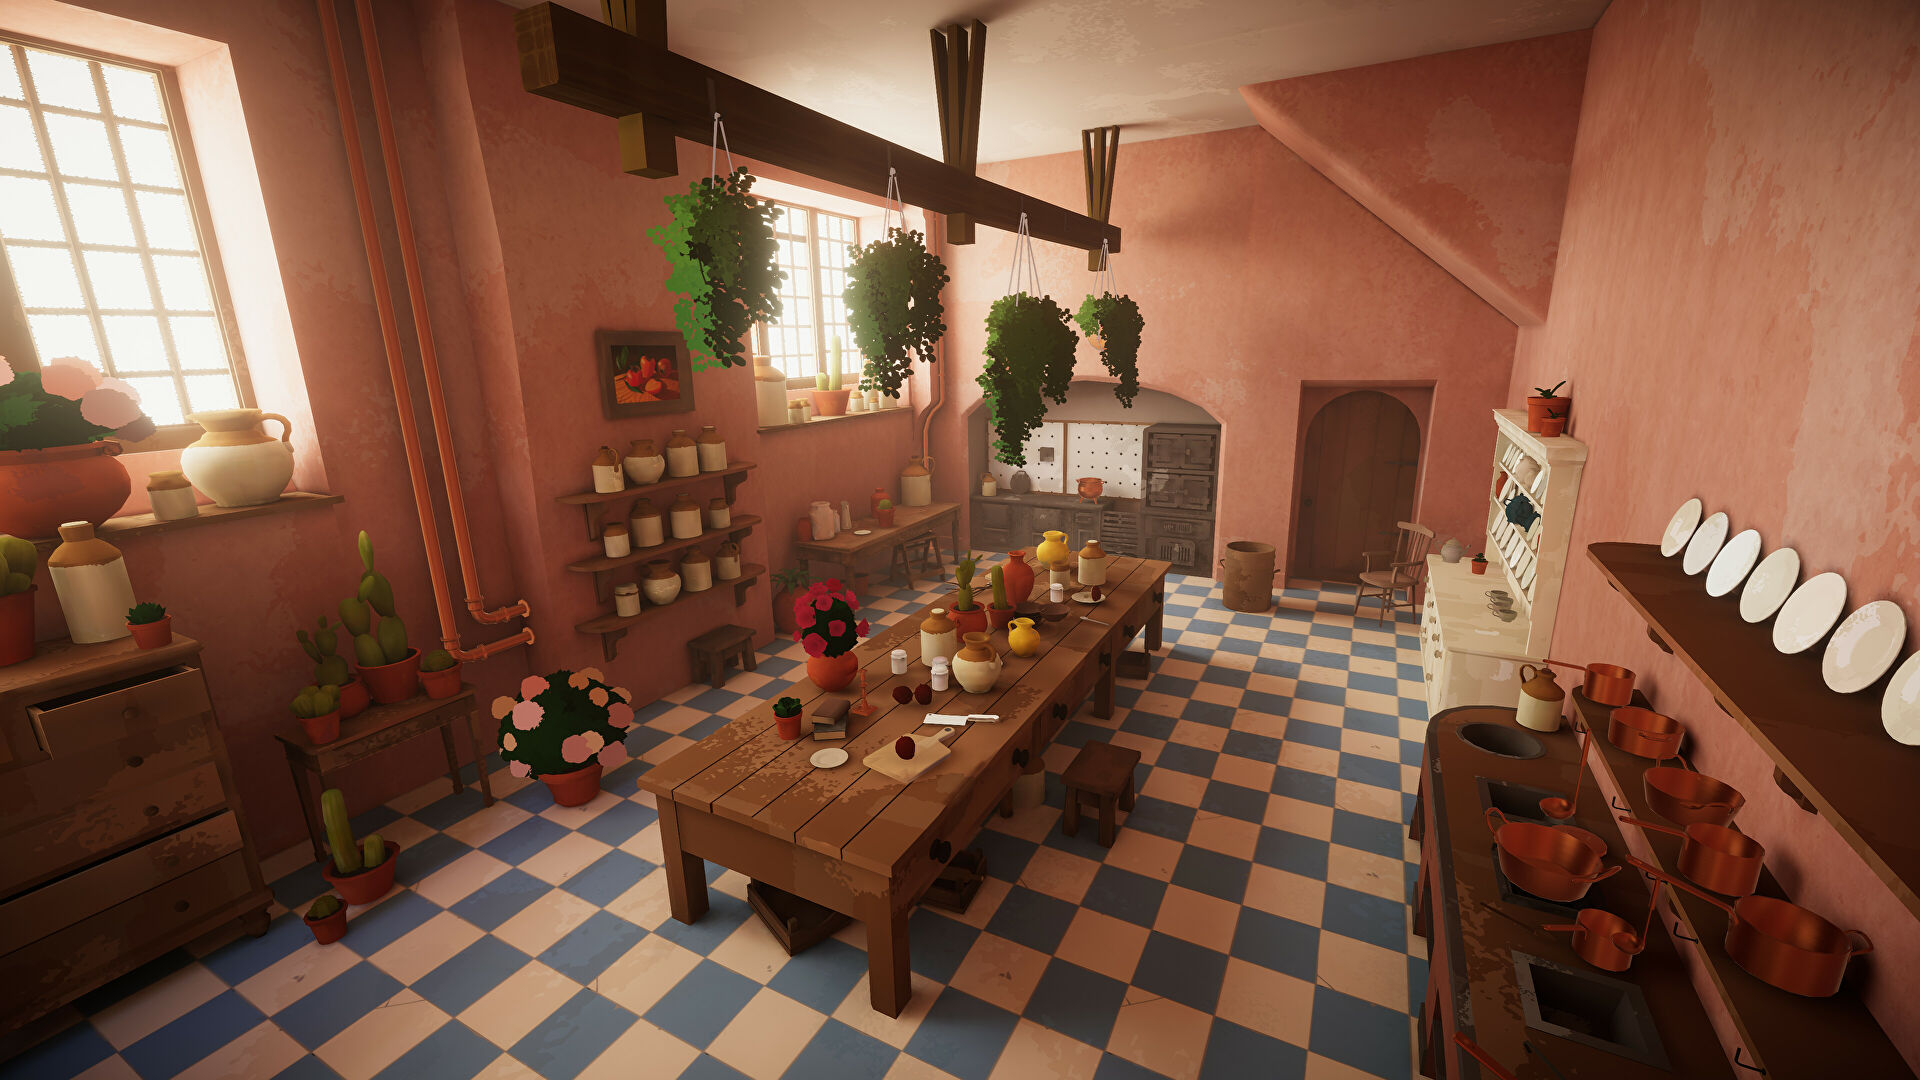 Botany Manor is a stunning puzzler about growing plants